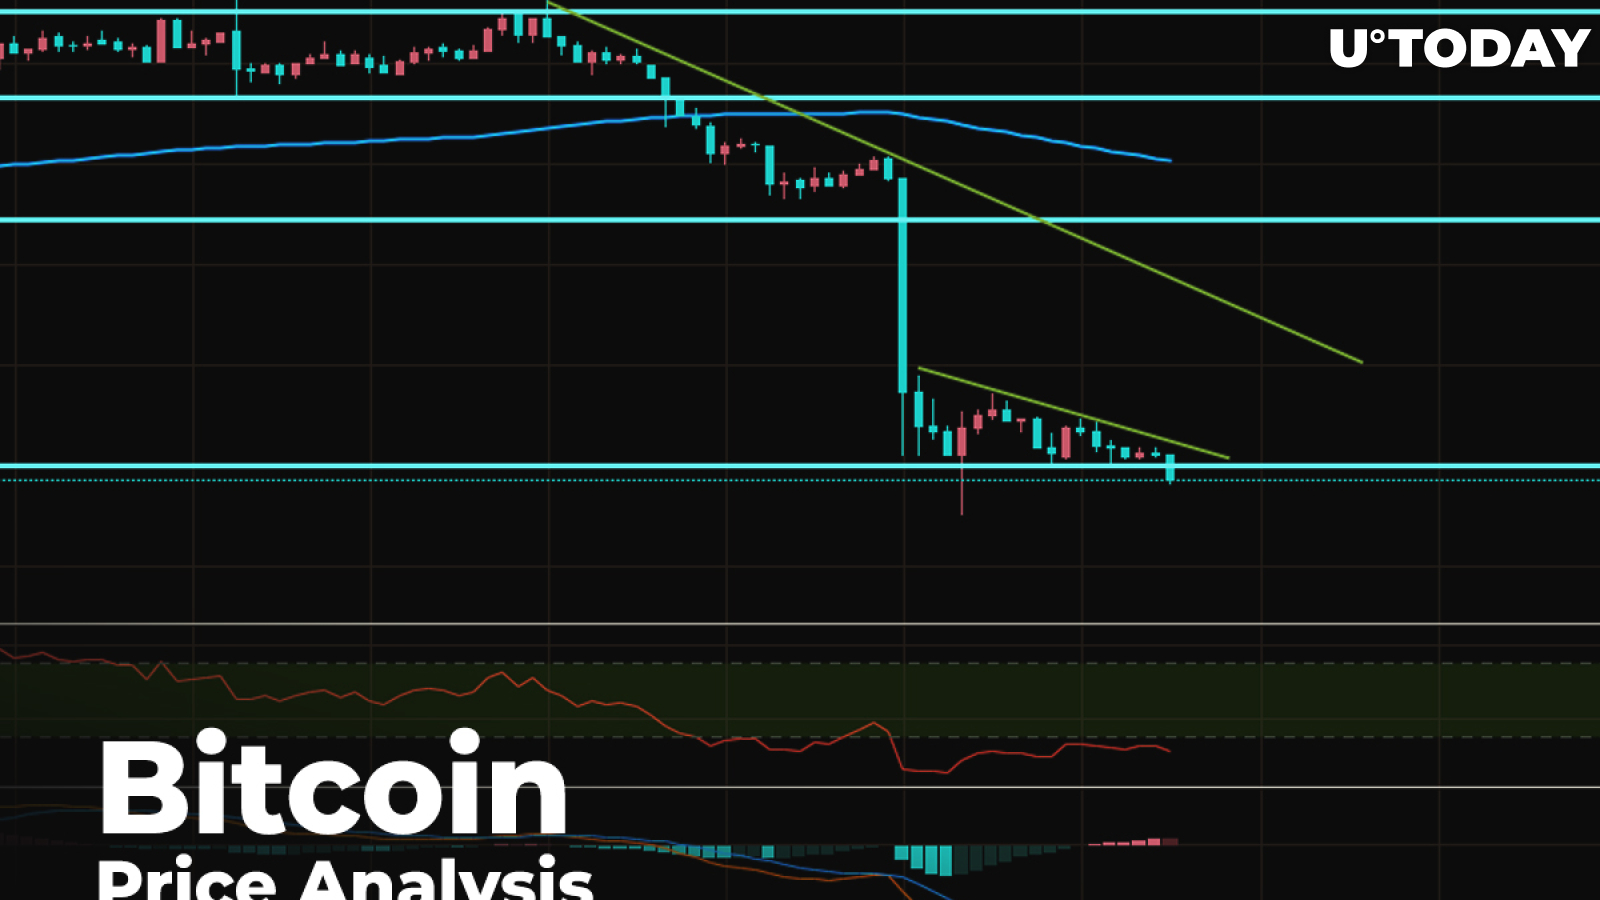 Bitcoin (BTC) Price Analysis — Indicators in Oversold Territory. Can Bulls Expect Fast Recovery?